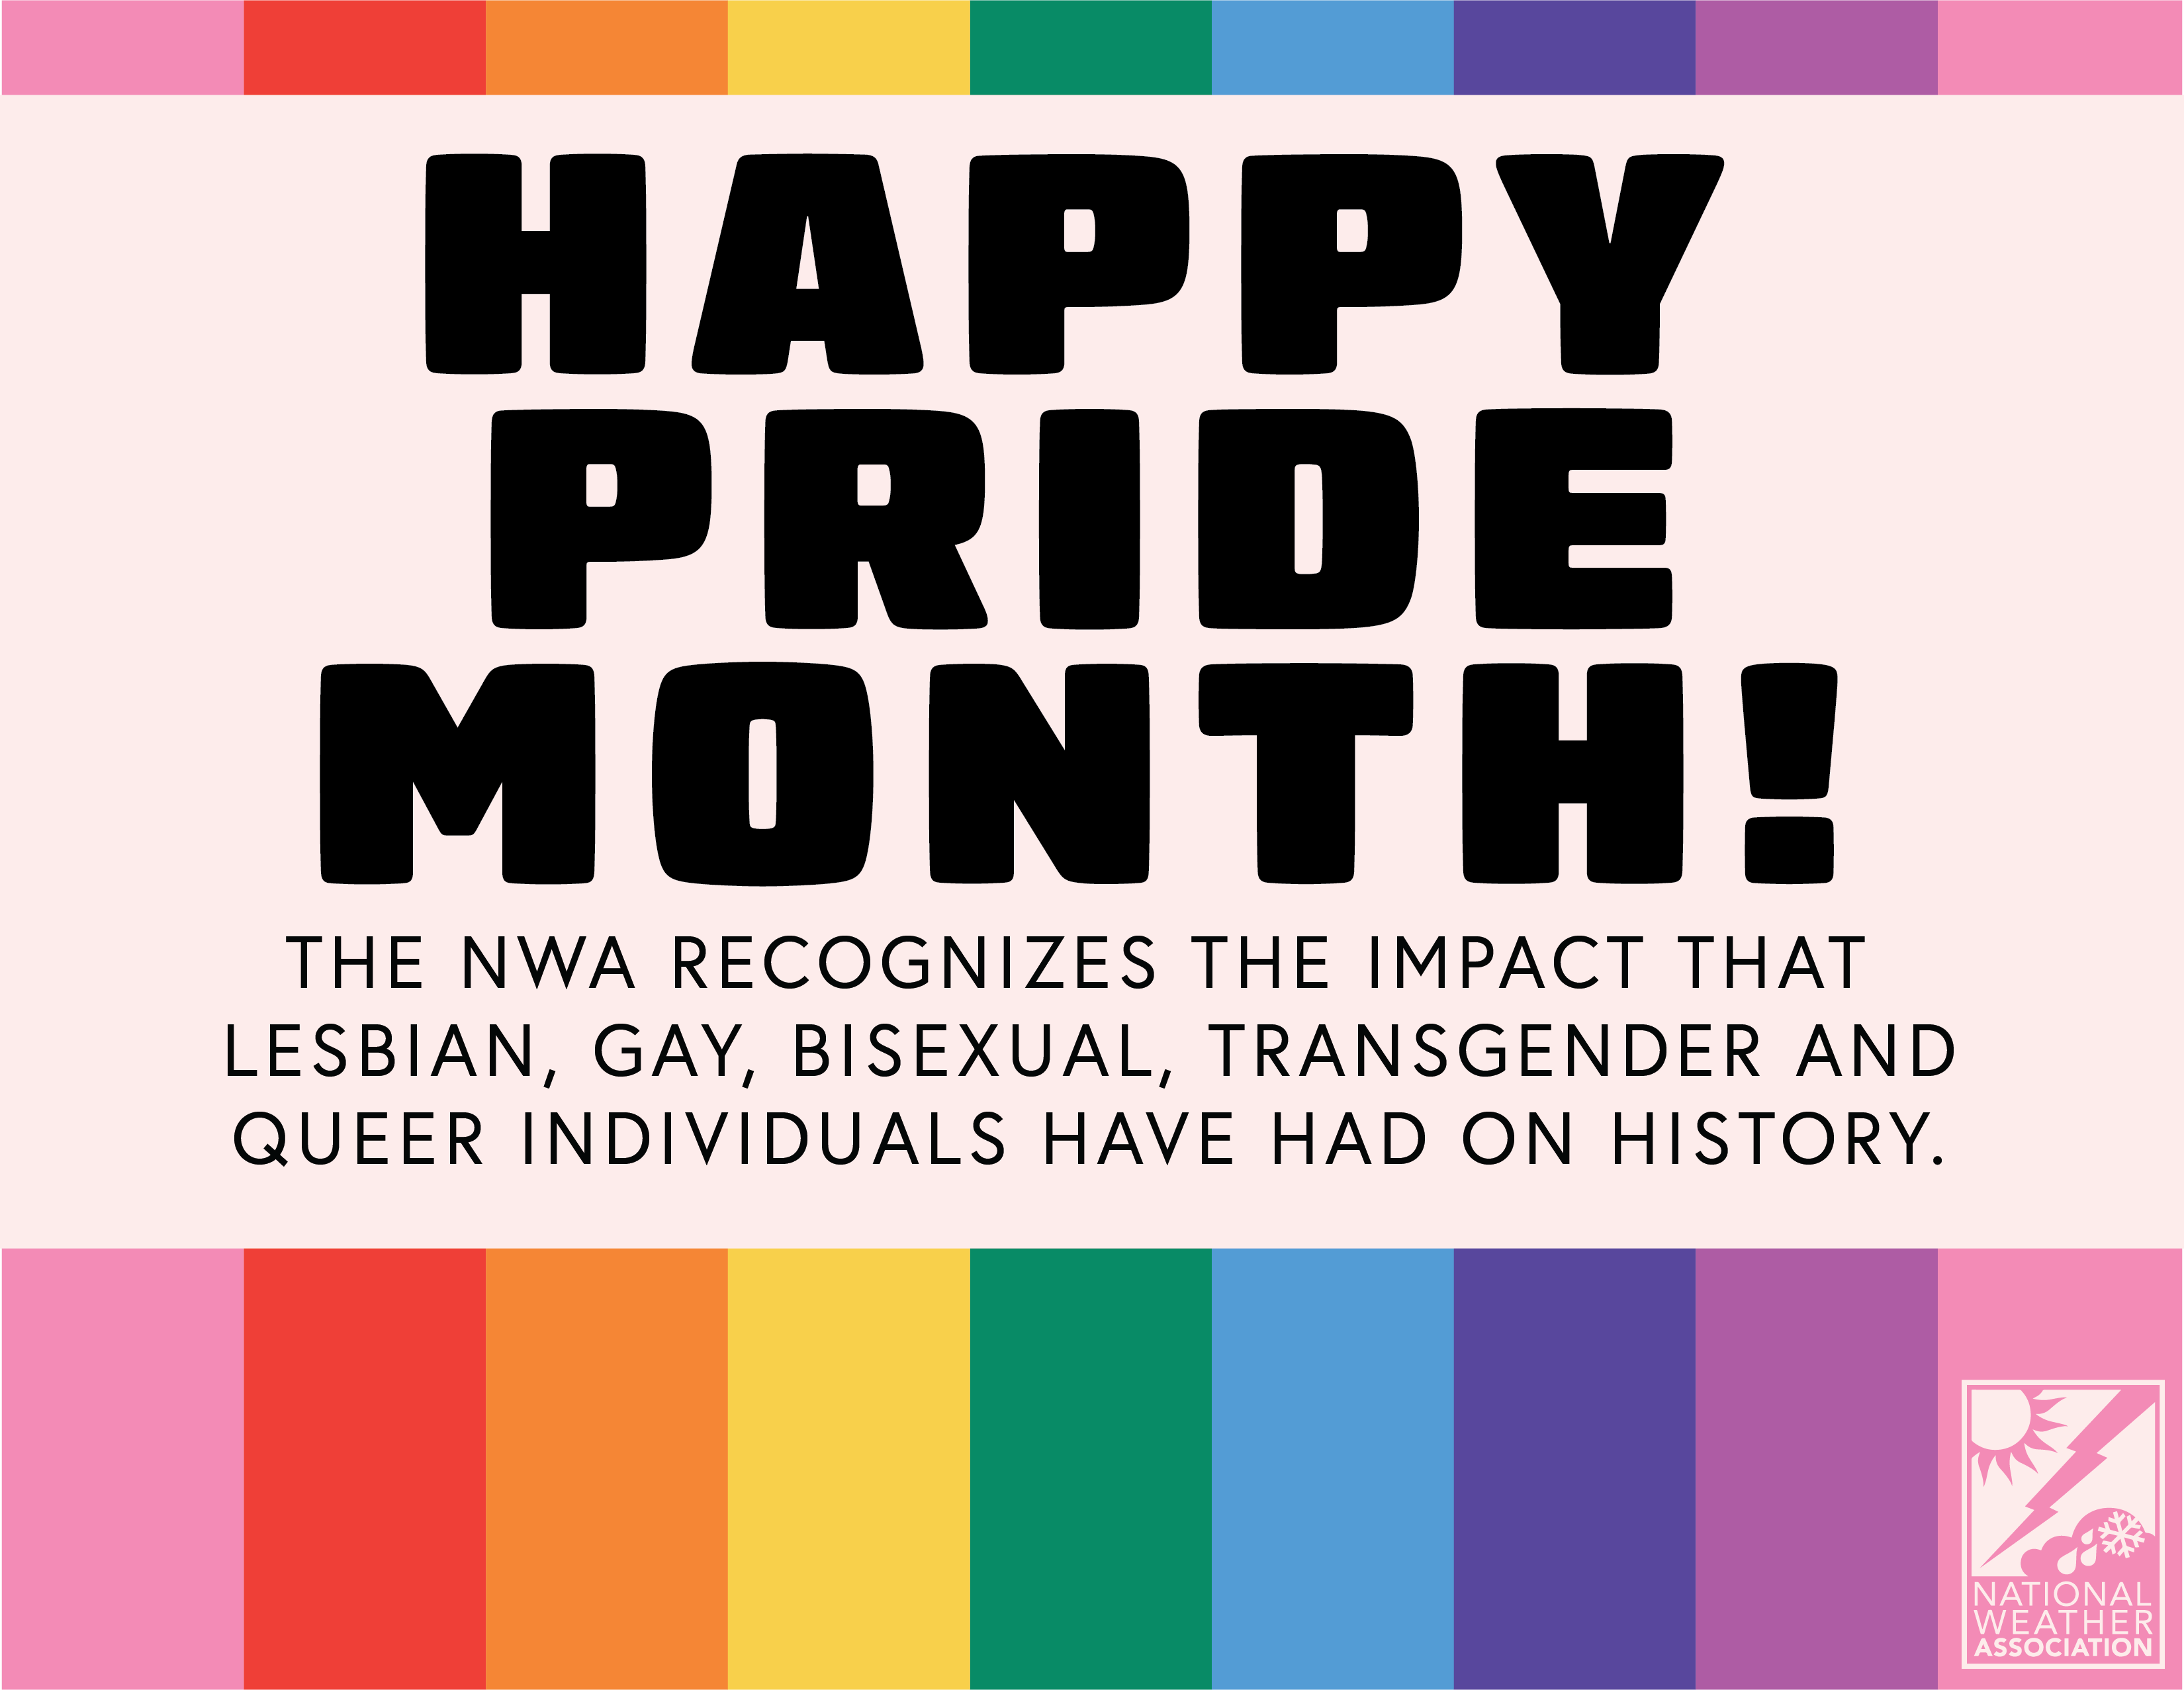 The NWA recognizes the impact that  lesbian, gay, bisexual, transgender andQueer individuals have had on history.